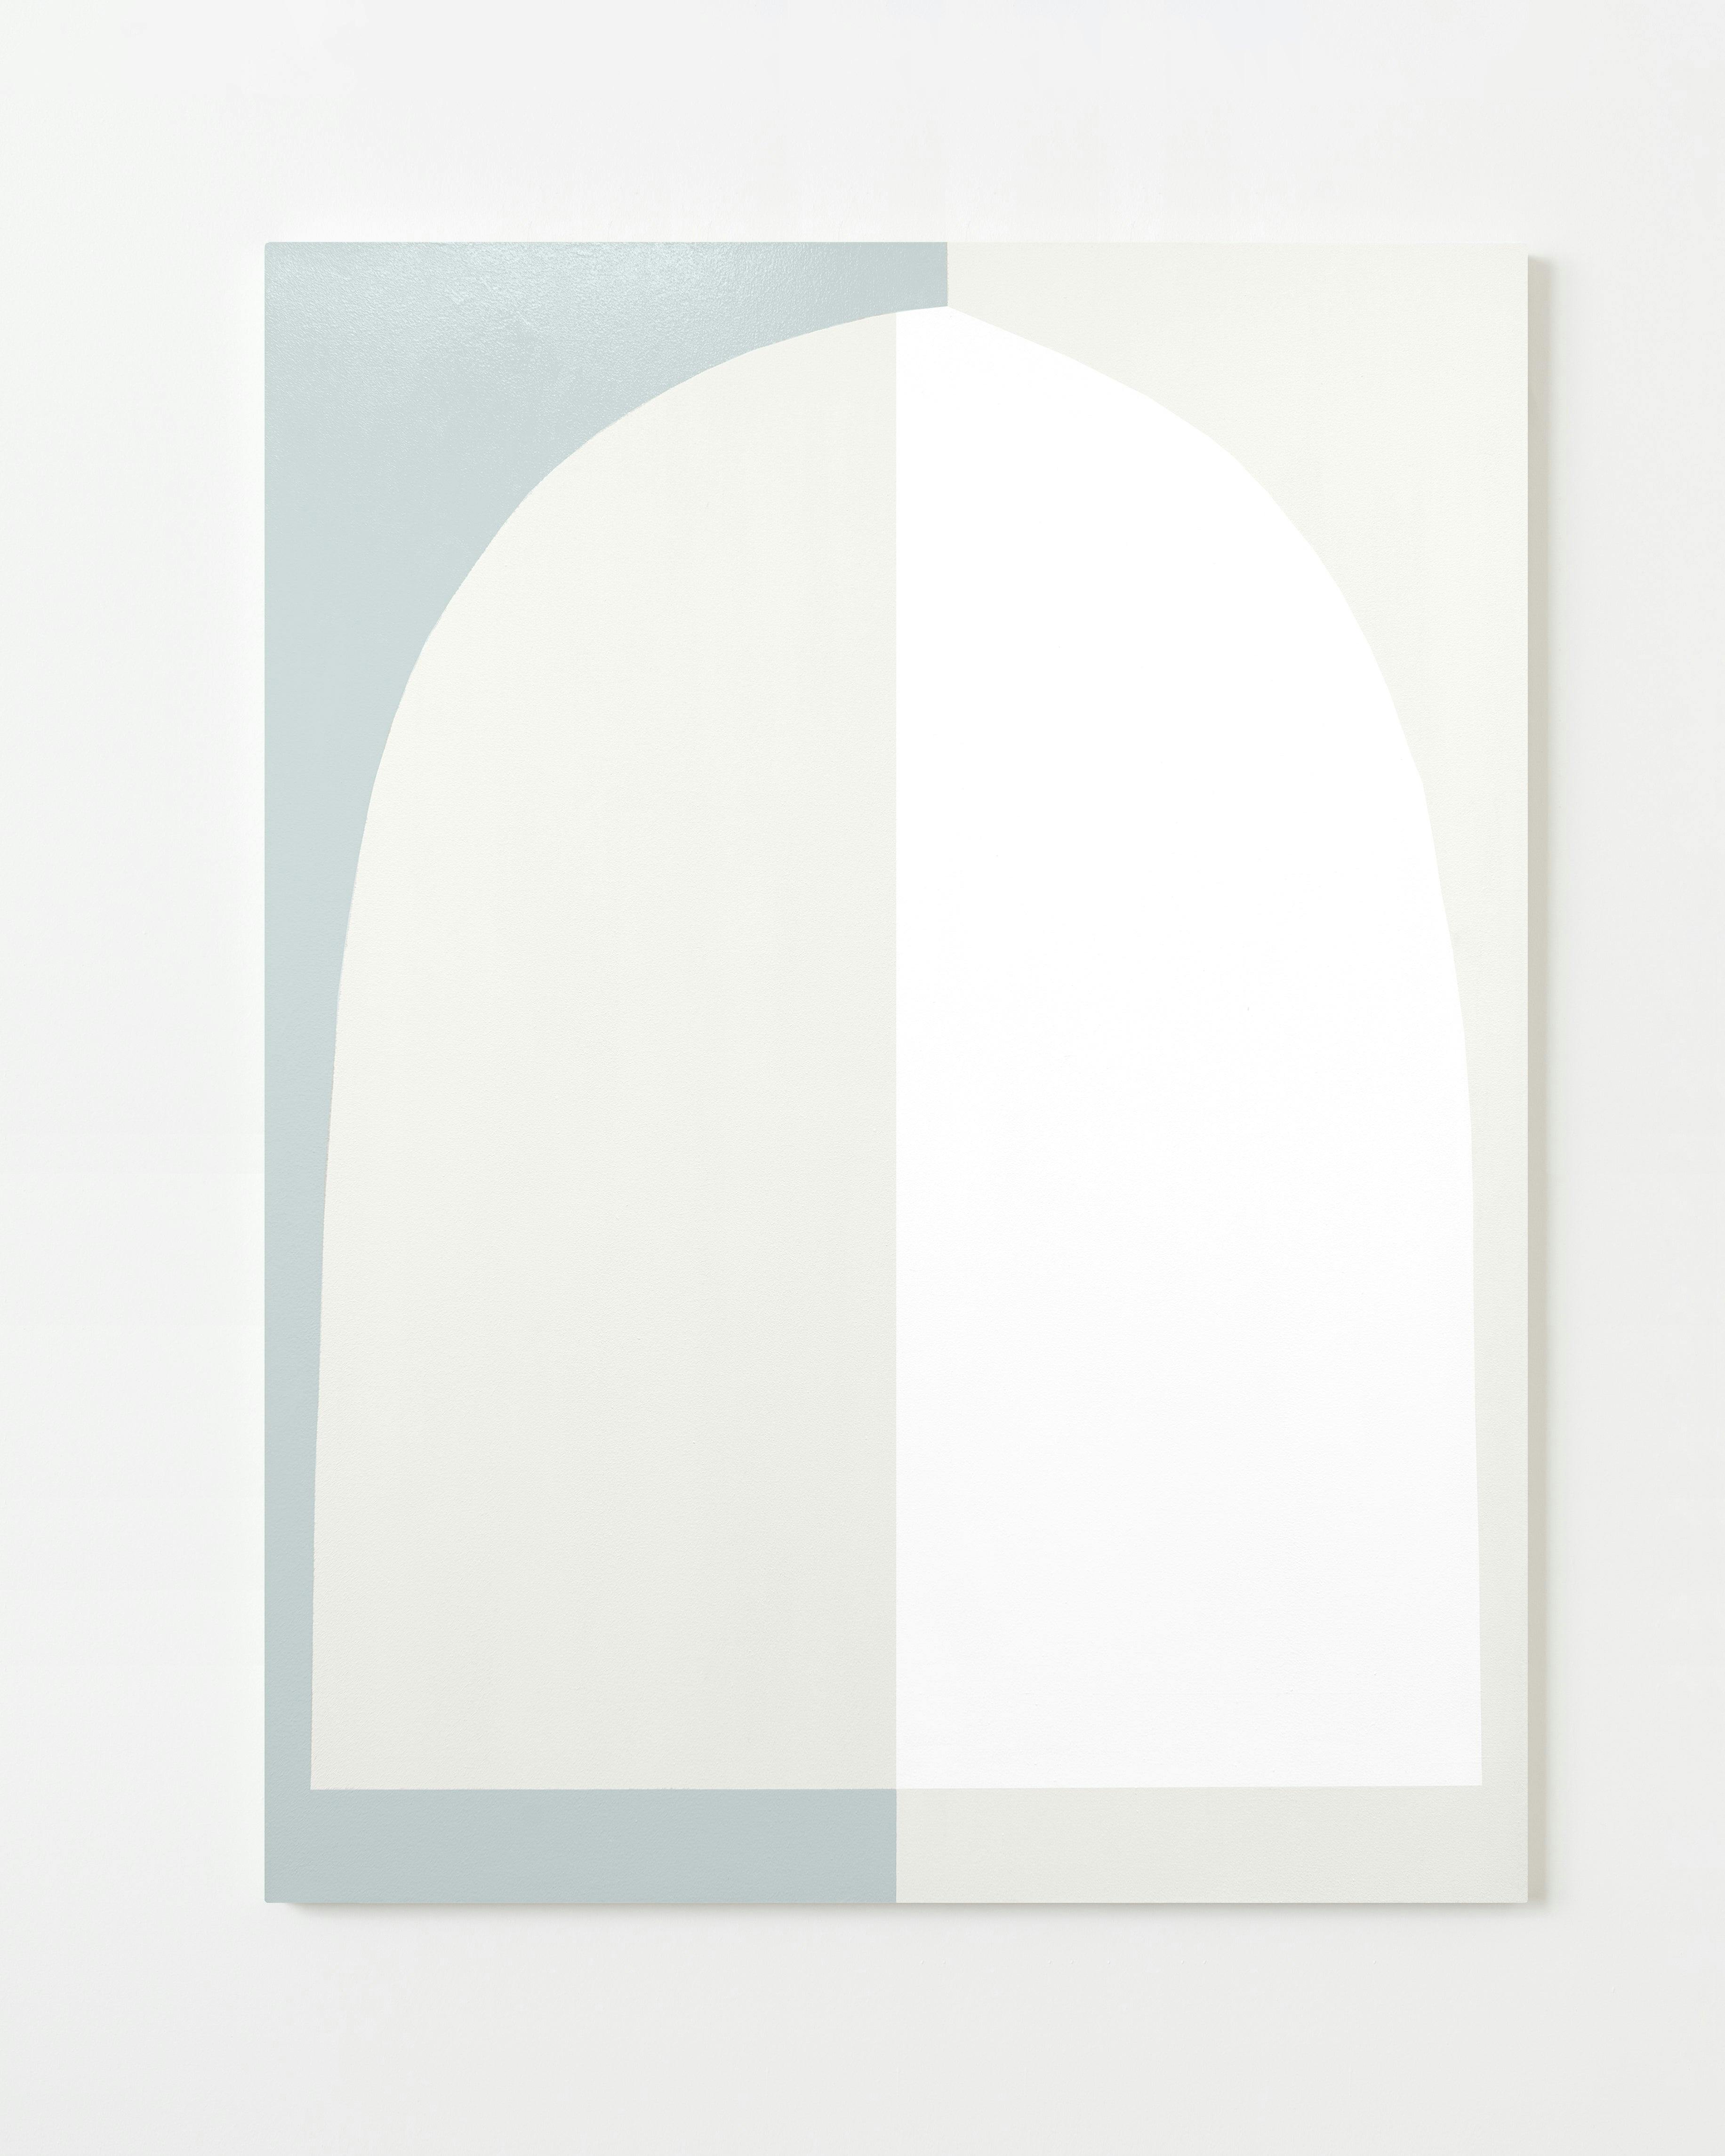 Aschely Vaughan Cone - Double White Arch Doublet - Painting